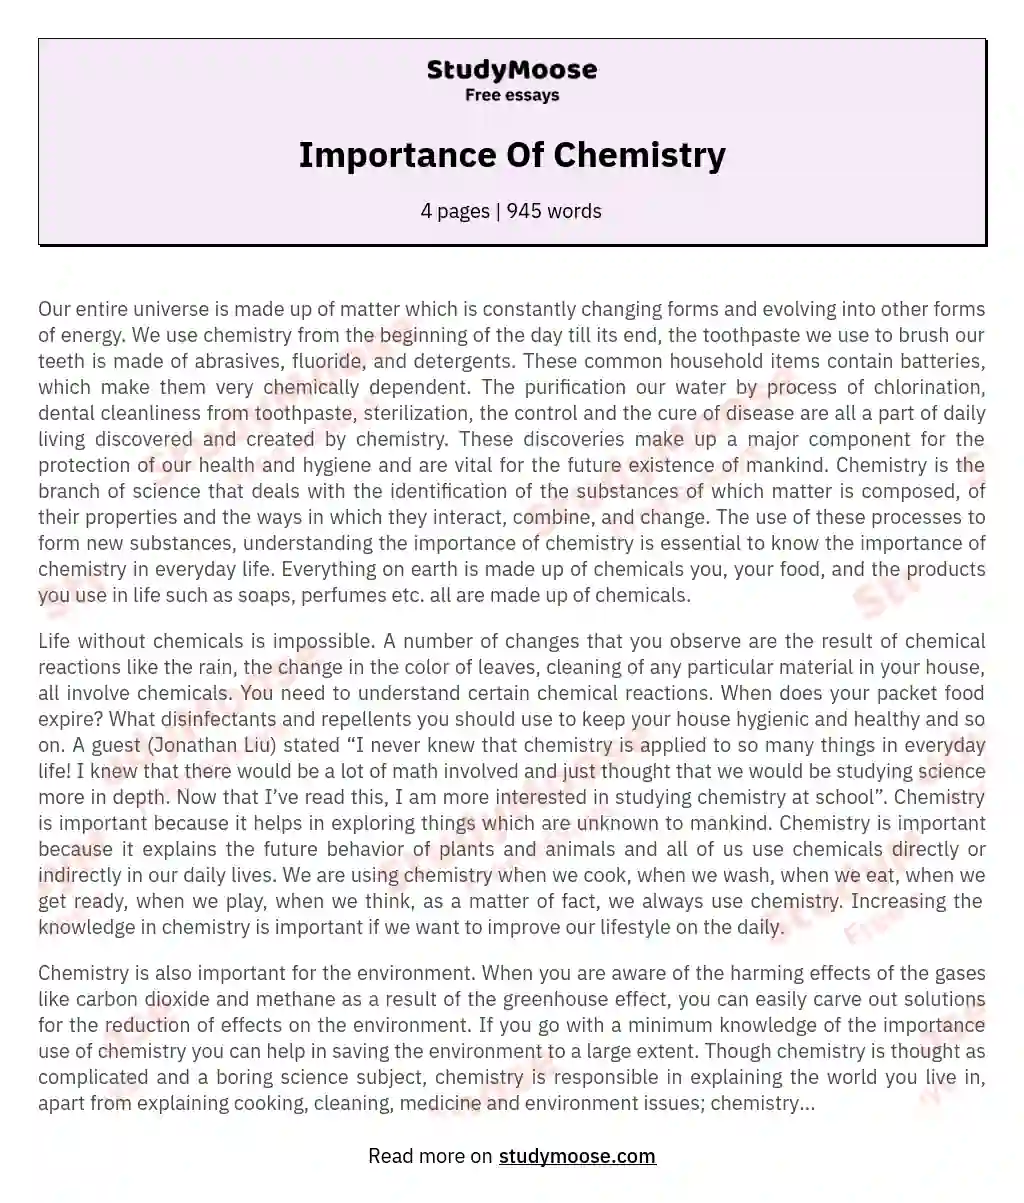 Importance Of Chemistry essay